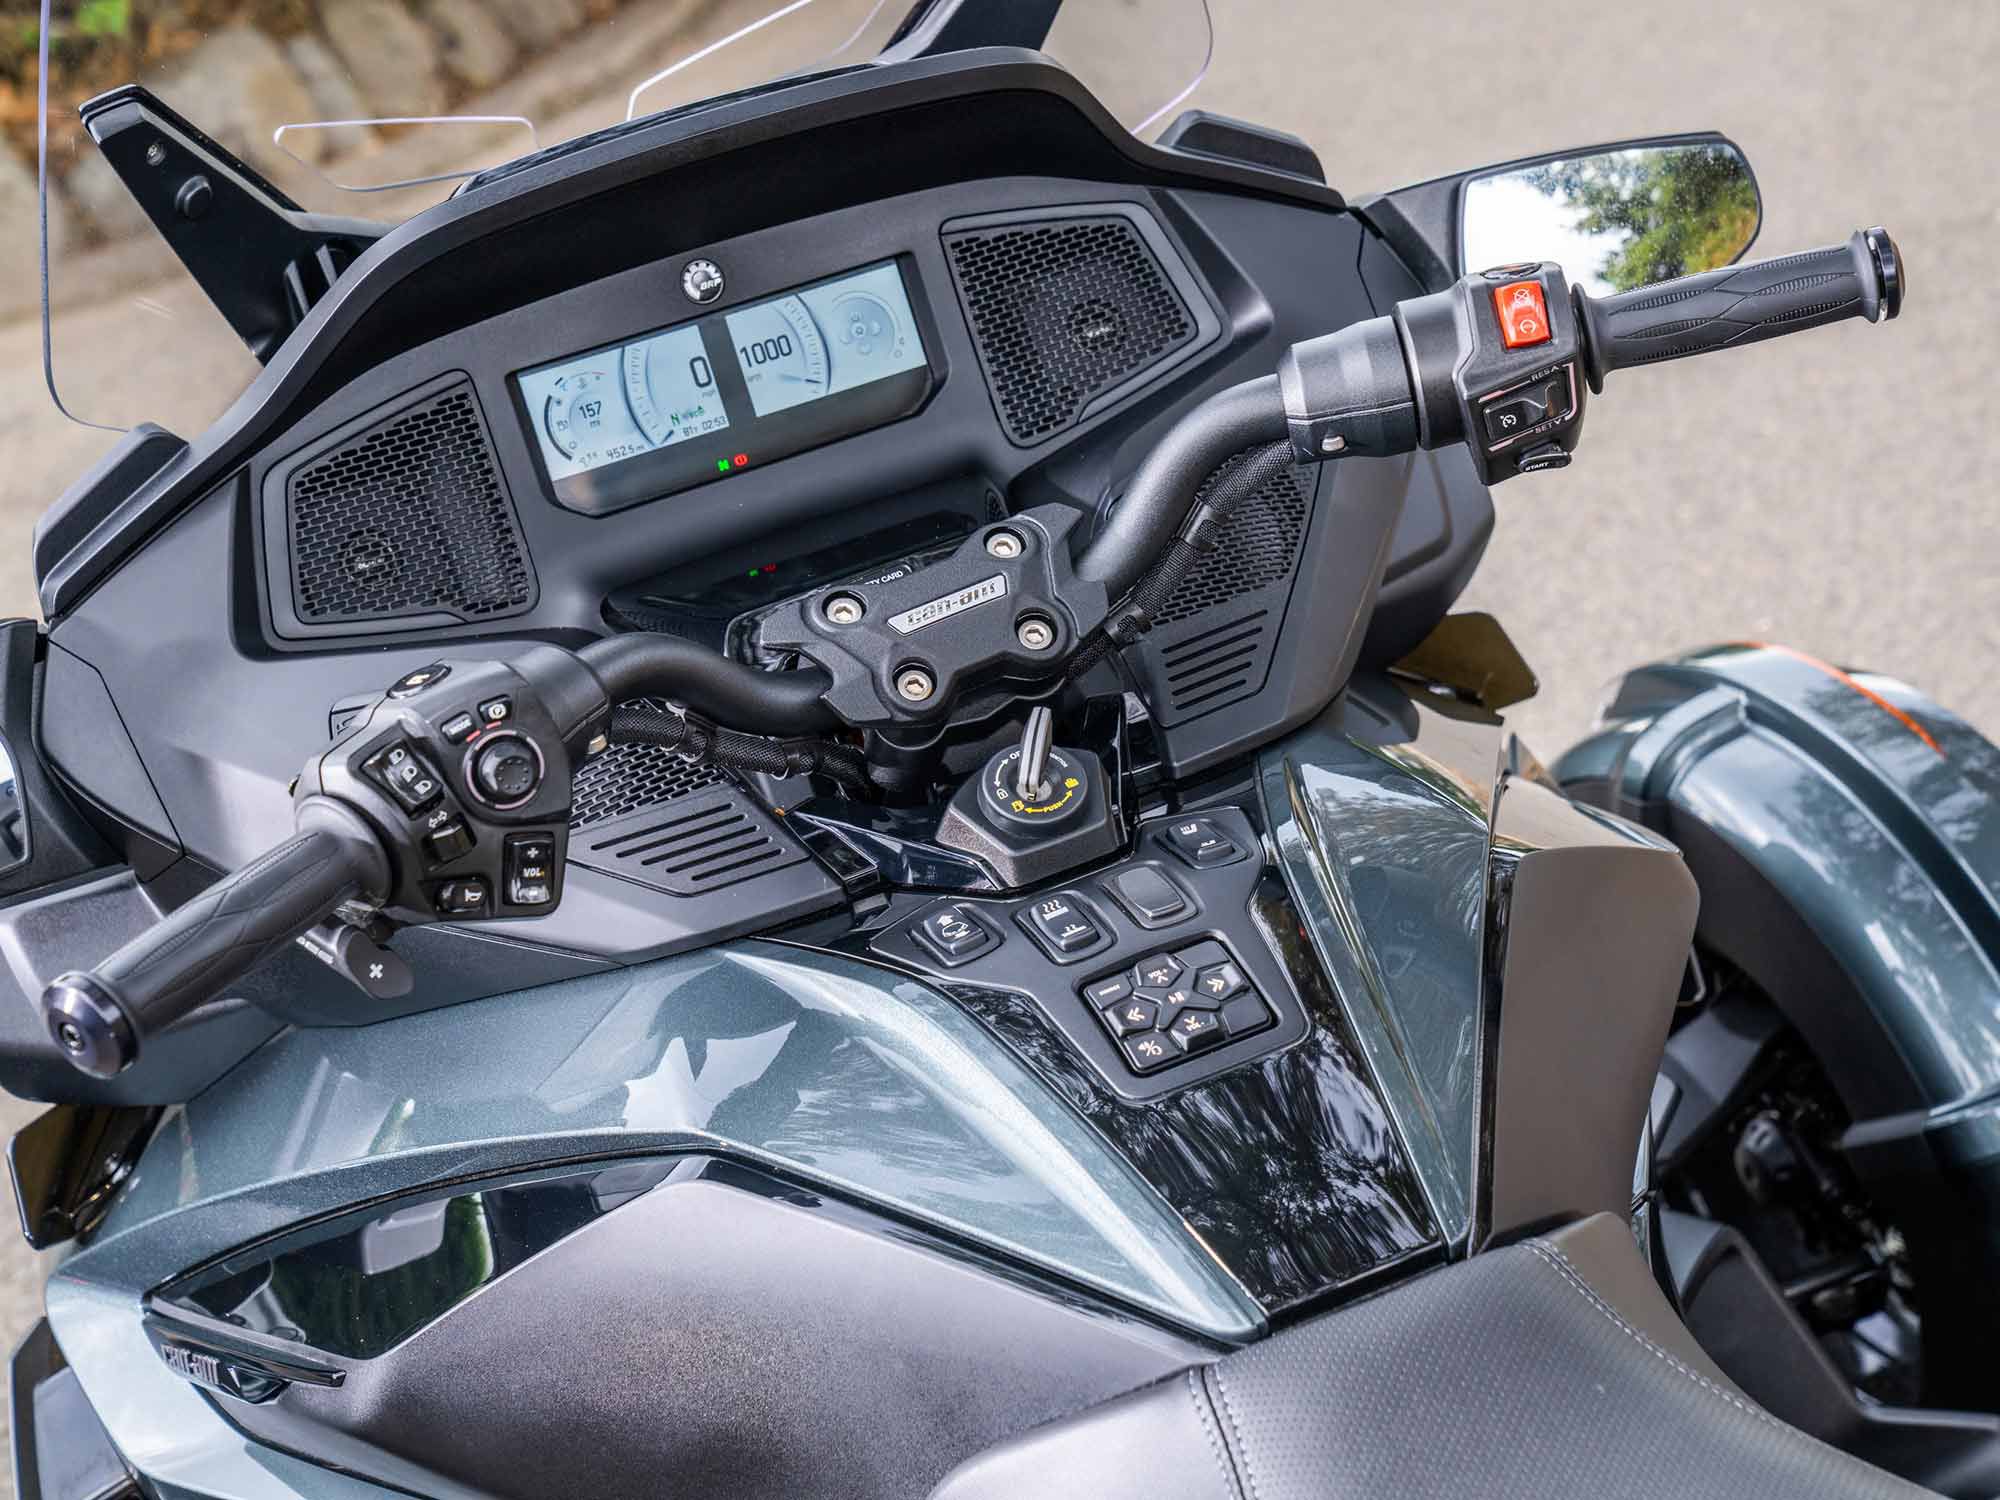 The Spyder RT offers a cozy cockpit. We love its broad front end, which does a fine job of shielding the rider from the elements. Instrumentation, however, needs to be larger.